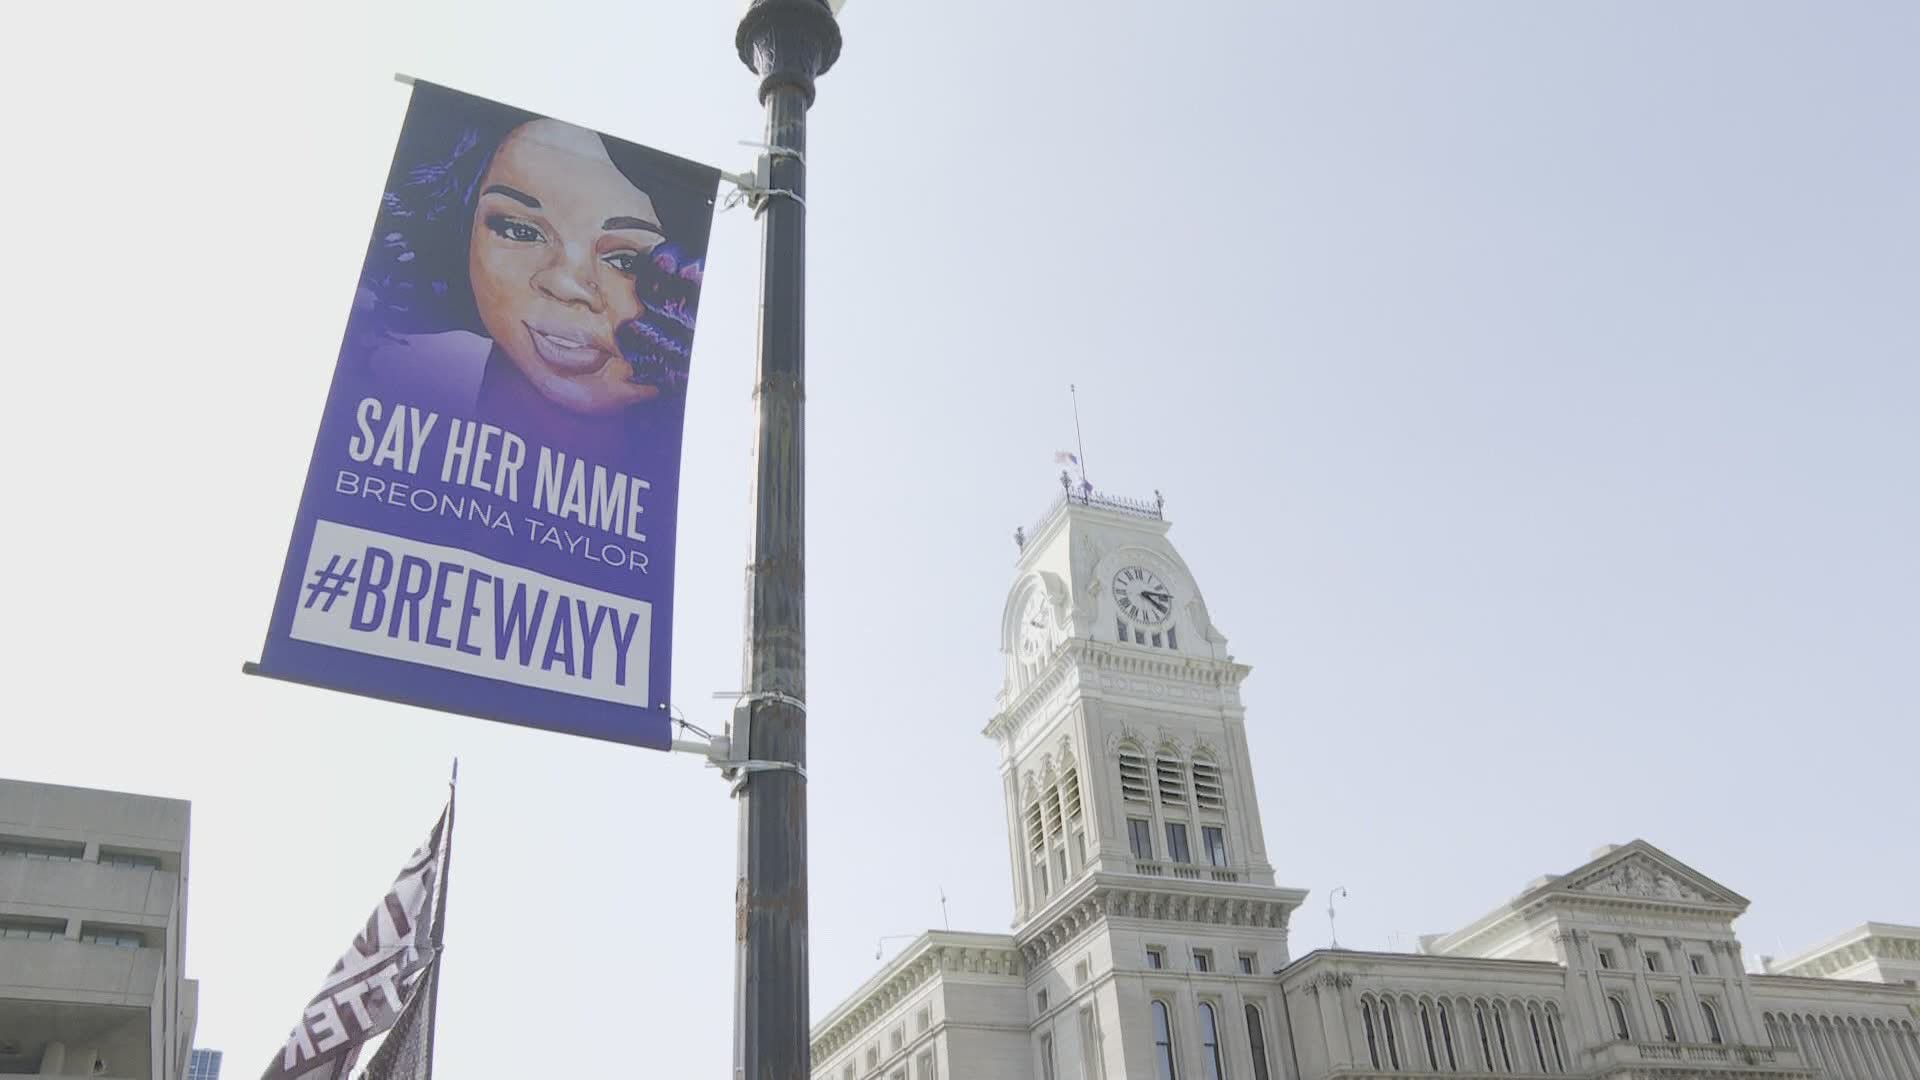 The executive director of the Louisville Downtown Partnership, which controls banners, said they do not plan to take them down.